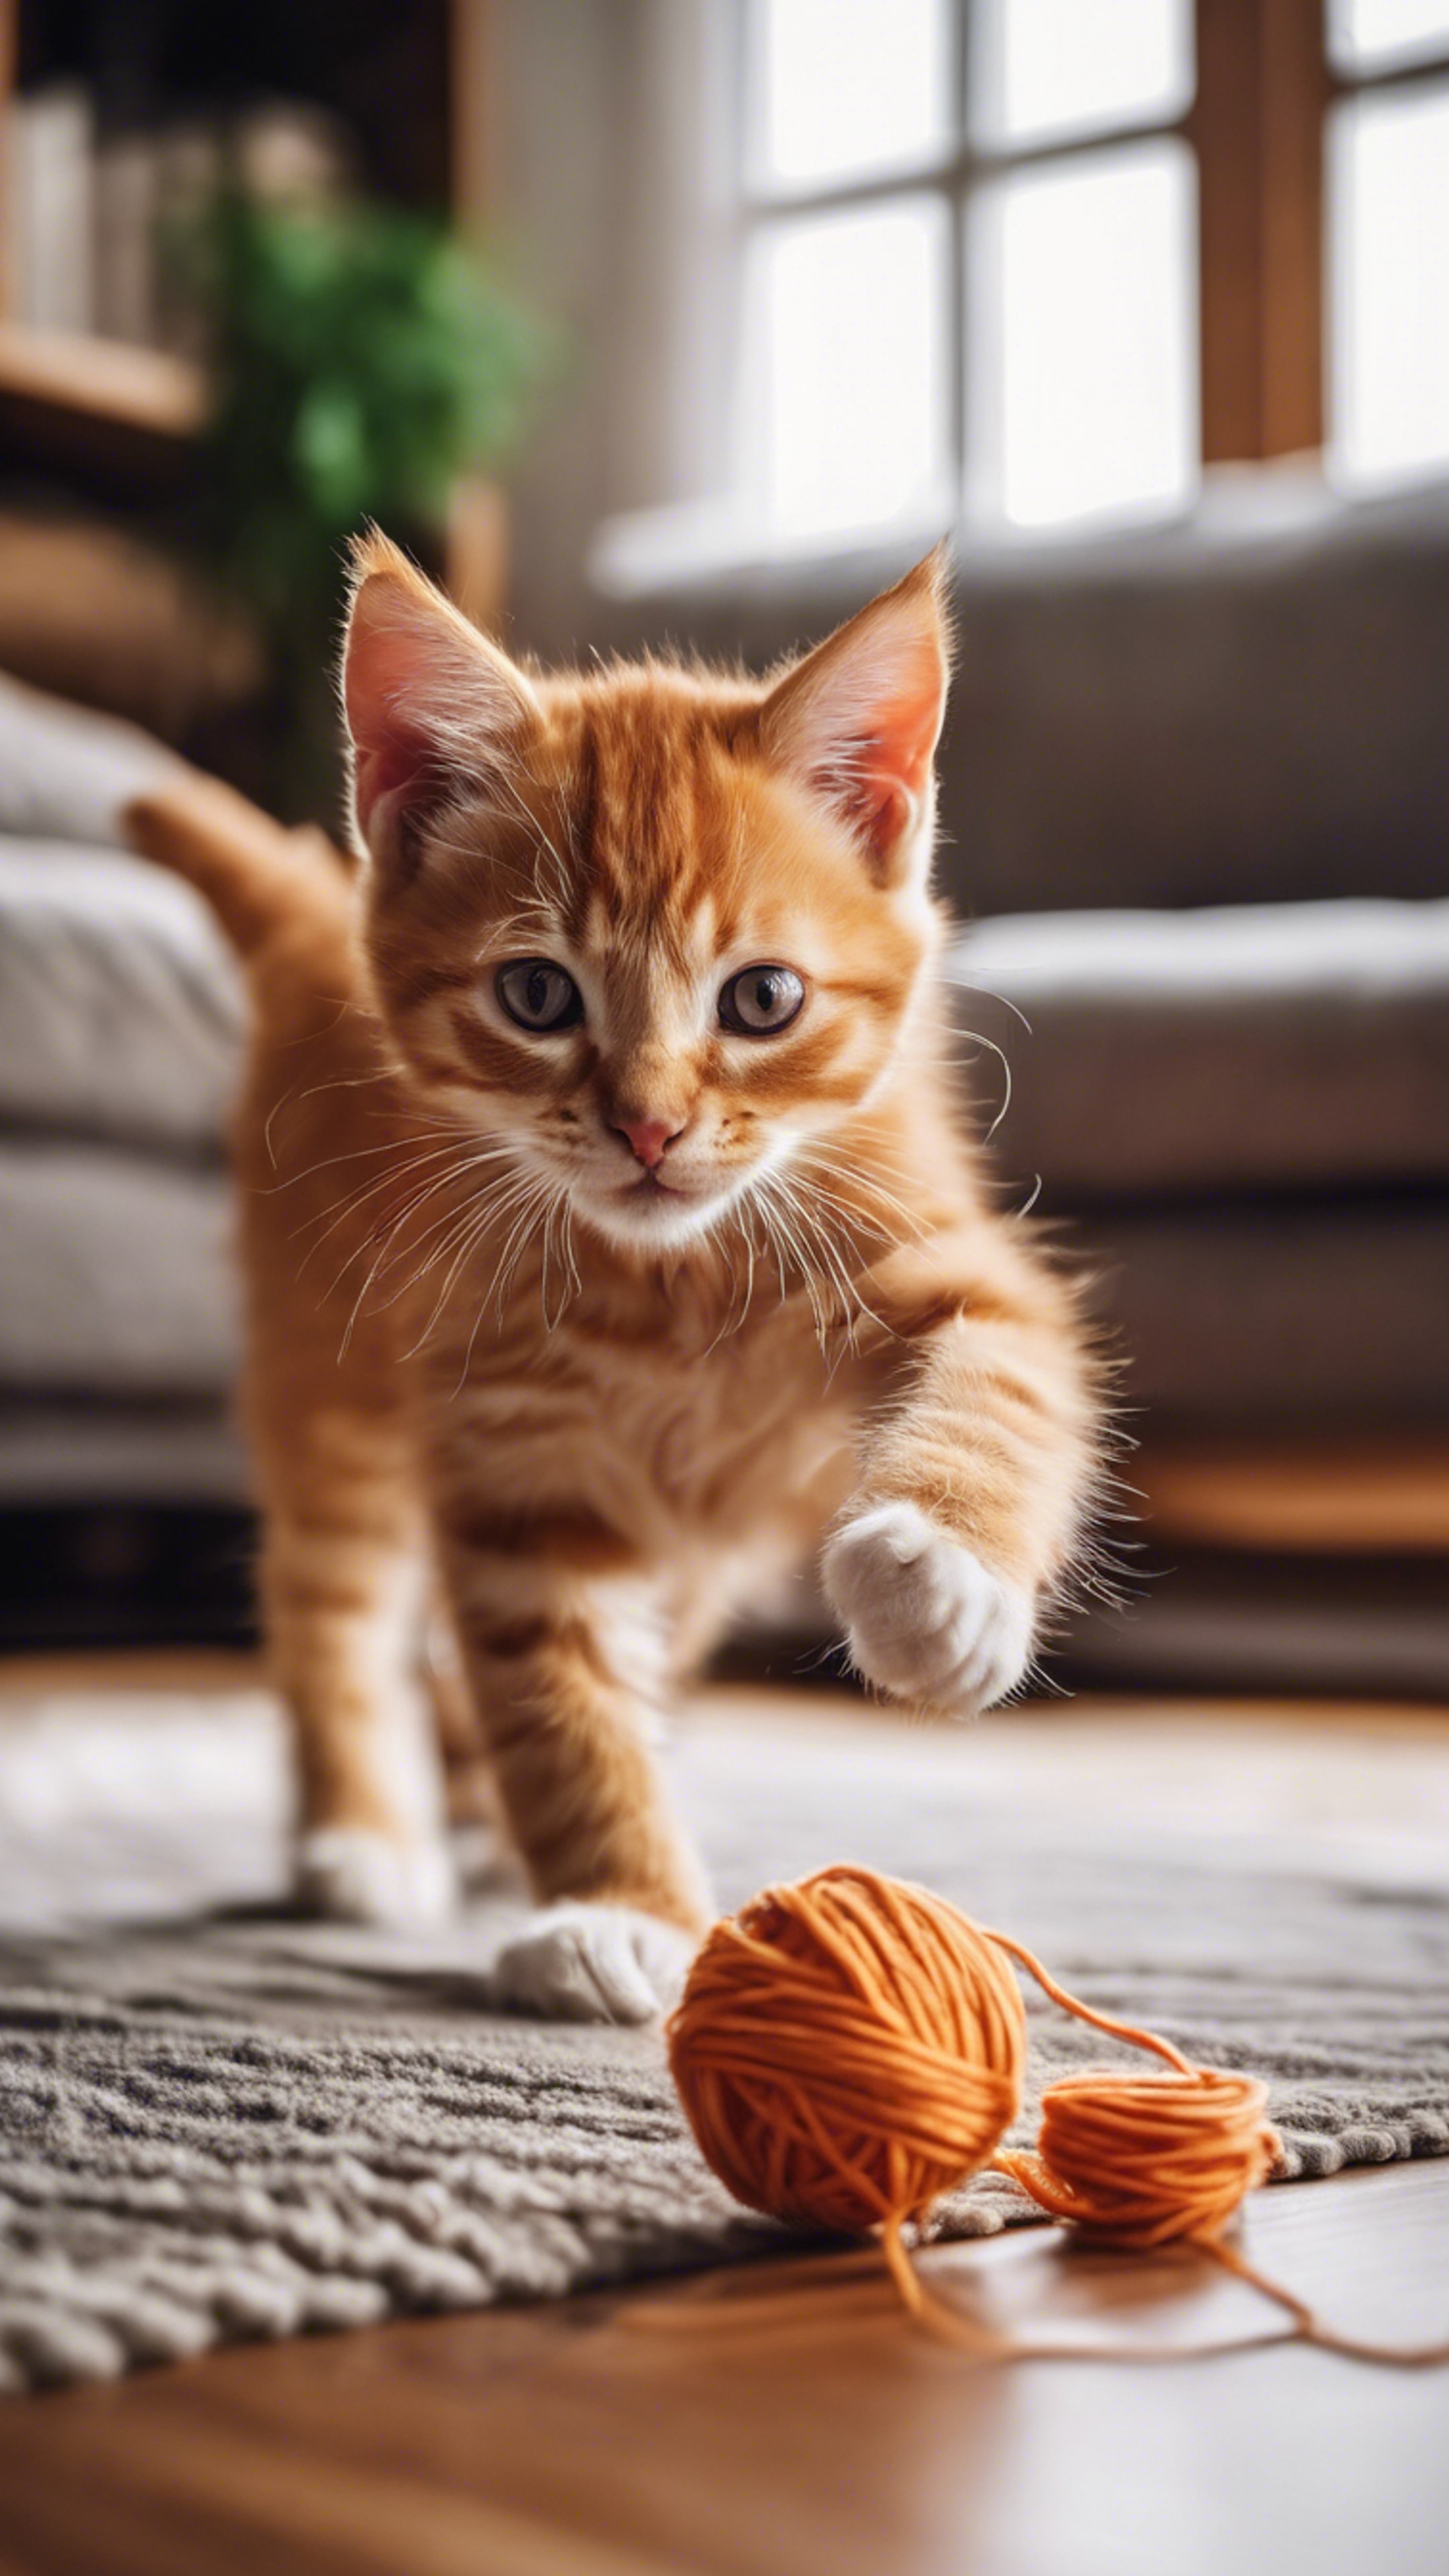 A playful orange tabby kitten, chasing a ball of yarn in a cozy wooden living room. Tapeta[48ba56b3f1554d3caaed]